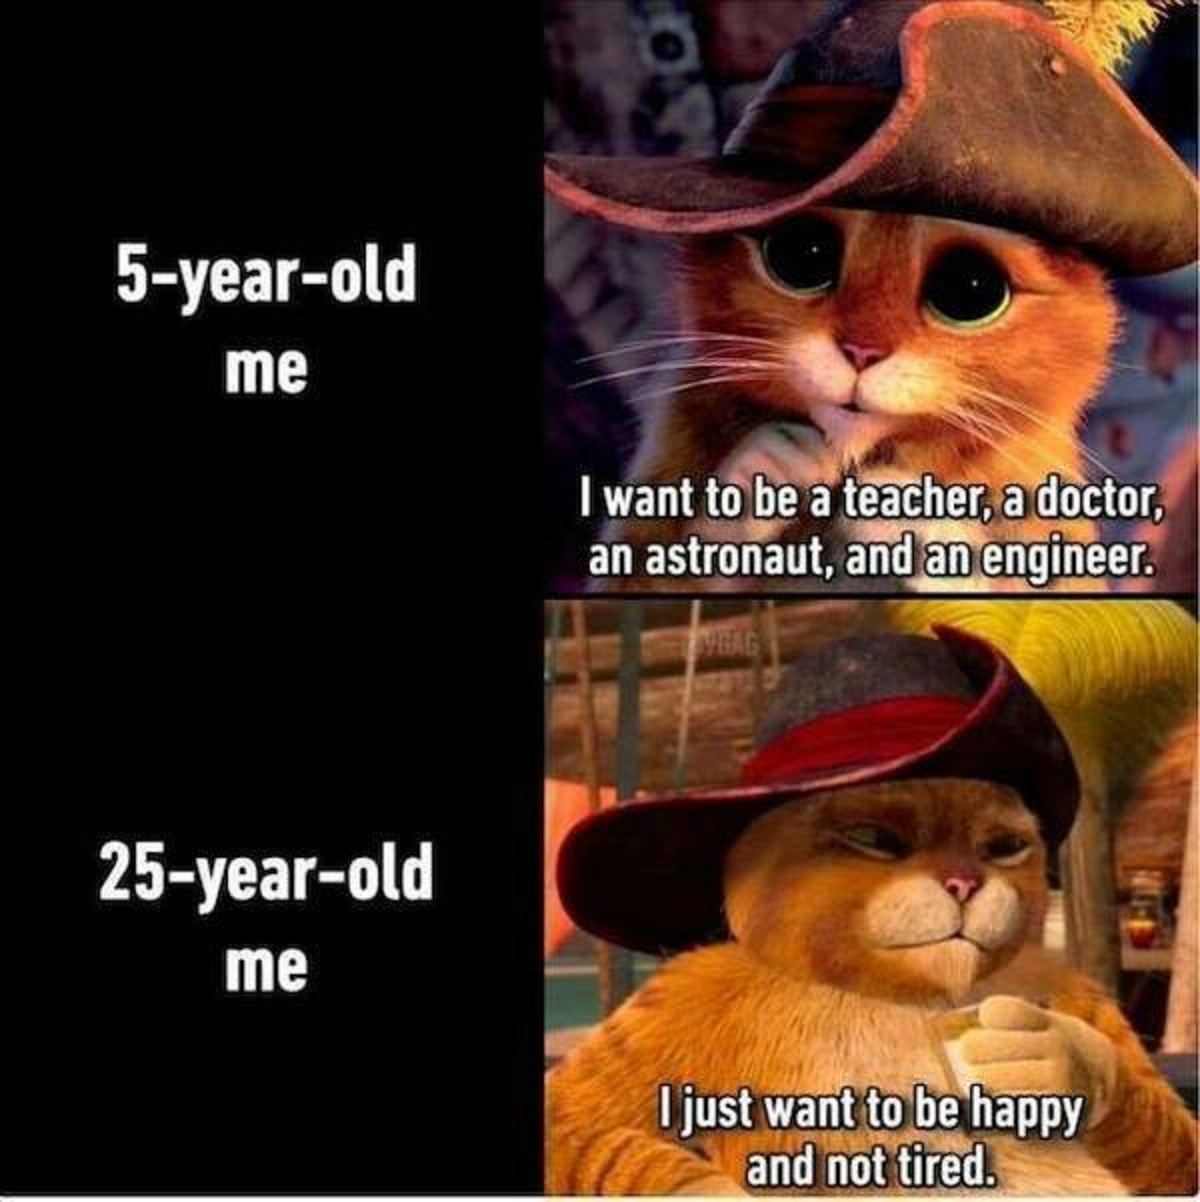 puss in boots is cute - 5yearold me I want to be a teacher, a doctor, an astronaut, and an engineer. Vibag 25yearold me I just want to be happy and not tired.